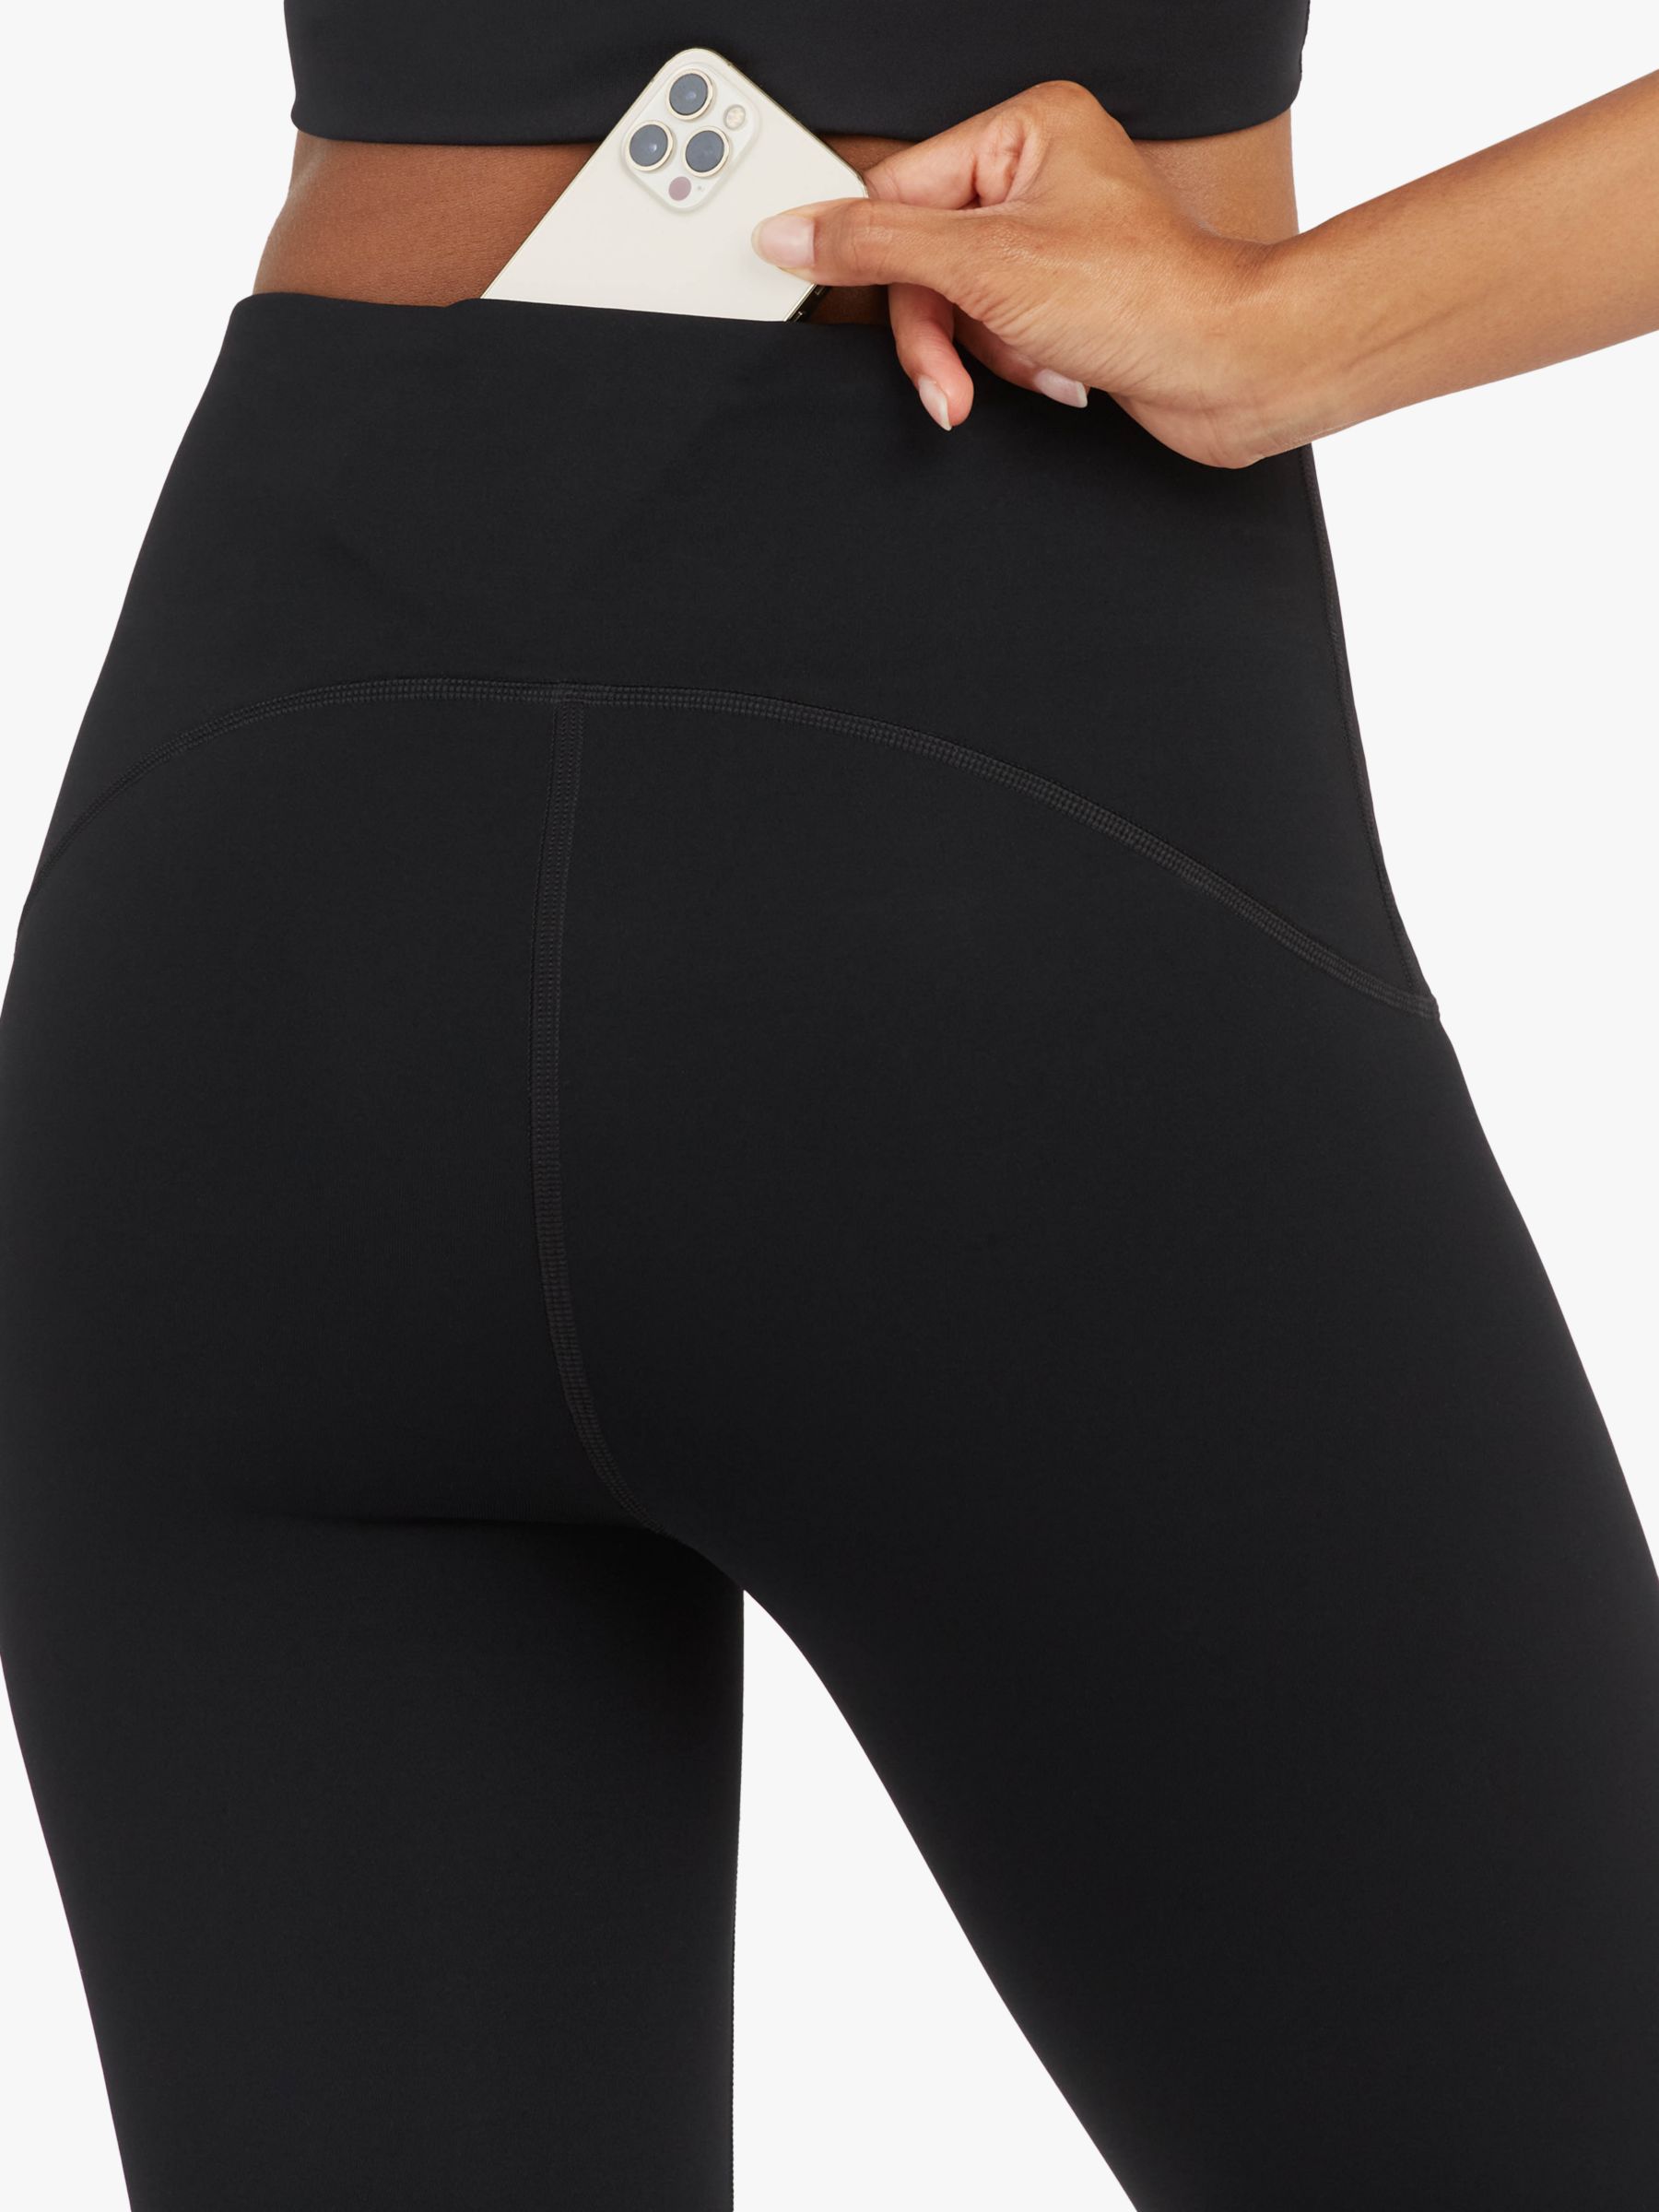 Our Booty-Lifting Leggings - Spanx